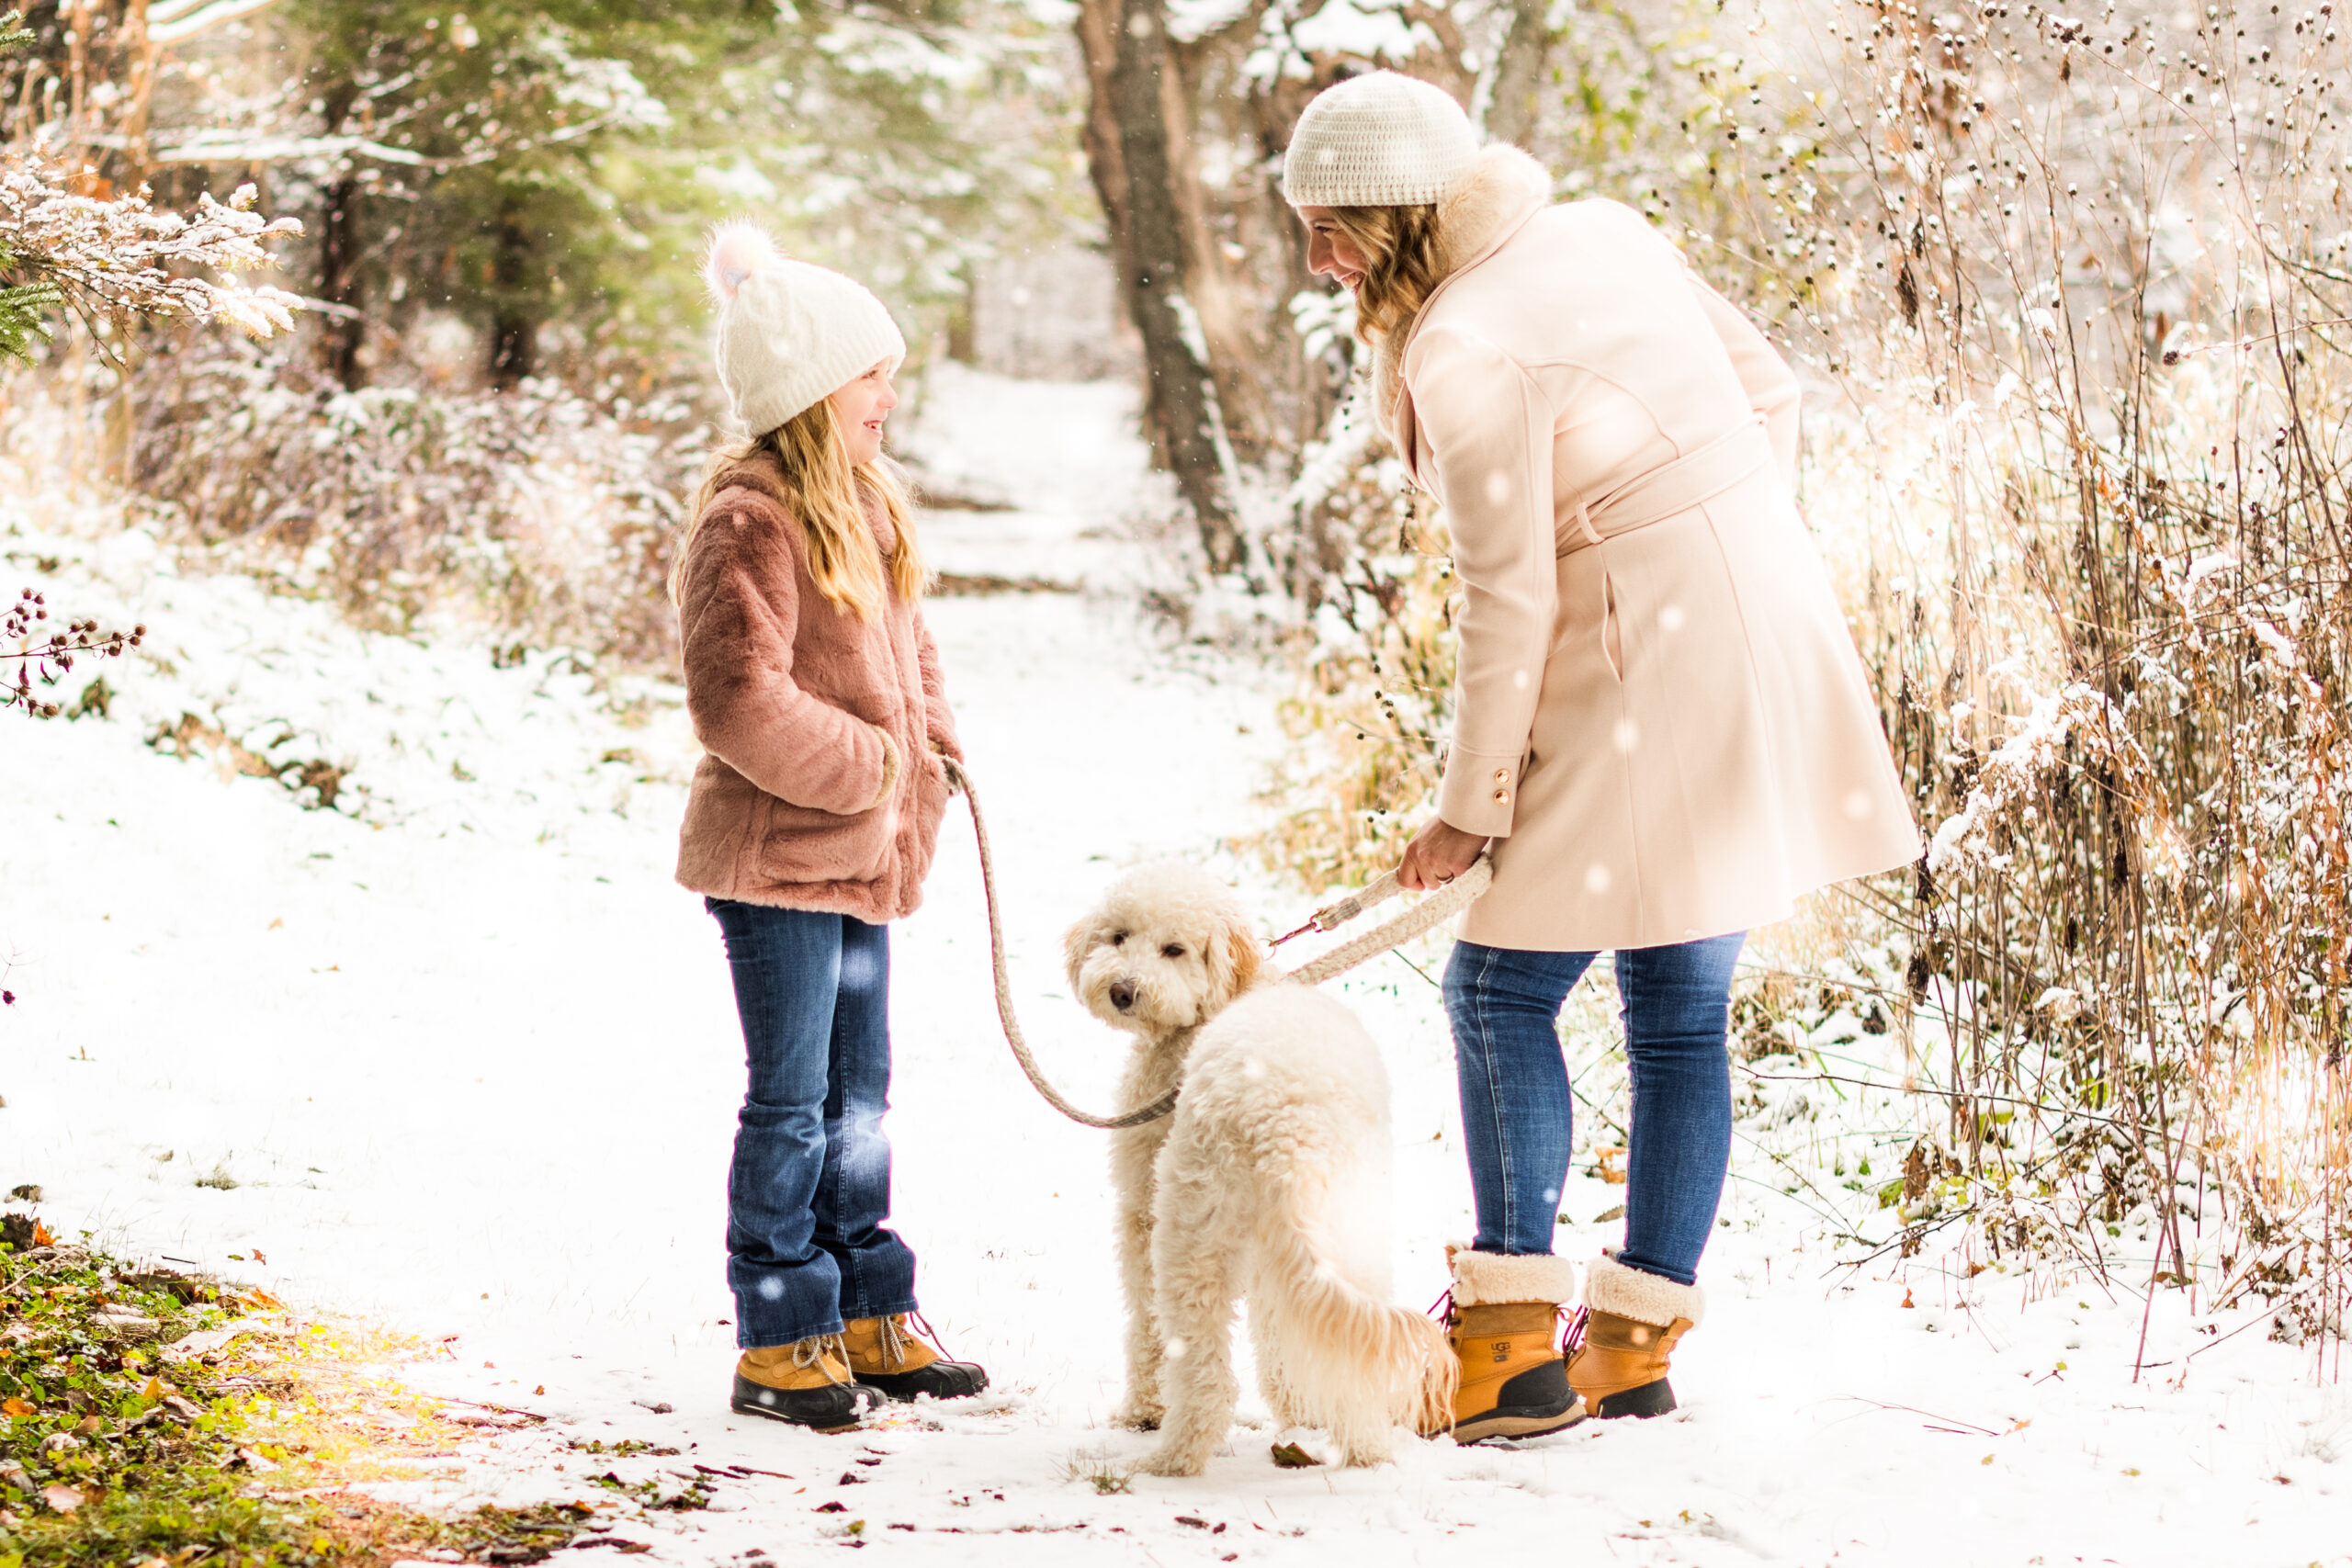 Mom, daughter, and fluffy white dog share a joyful snowy moment. Smiles, laughter, and warmth in the winter wonderland with evergreen trees in the background.